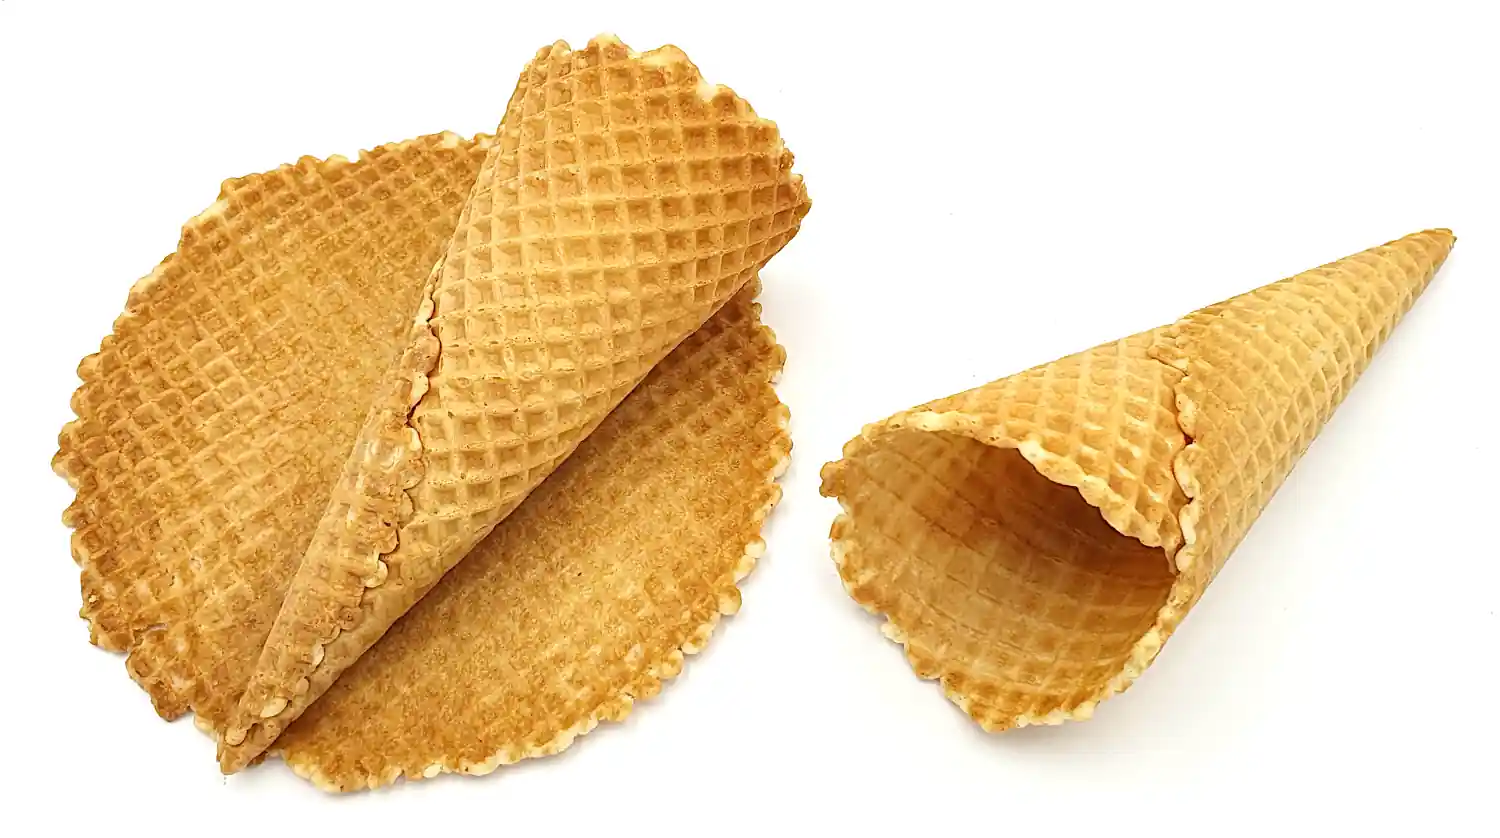 9 Best Waffle Cone Makers We've Tested in 2023 - TheLadyChef